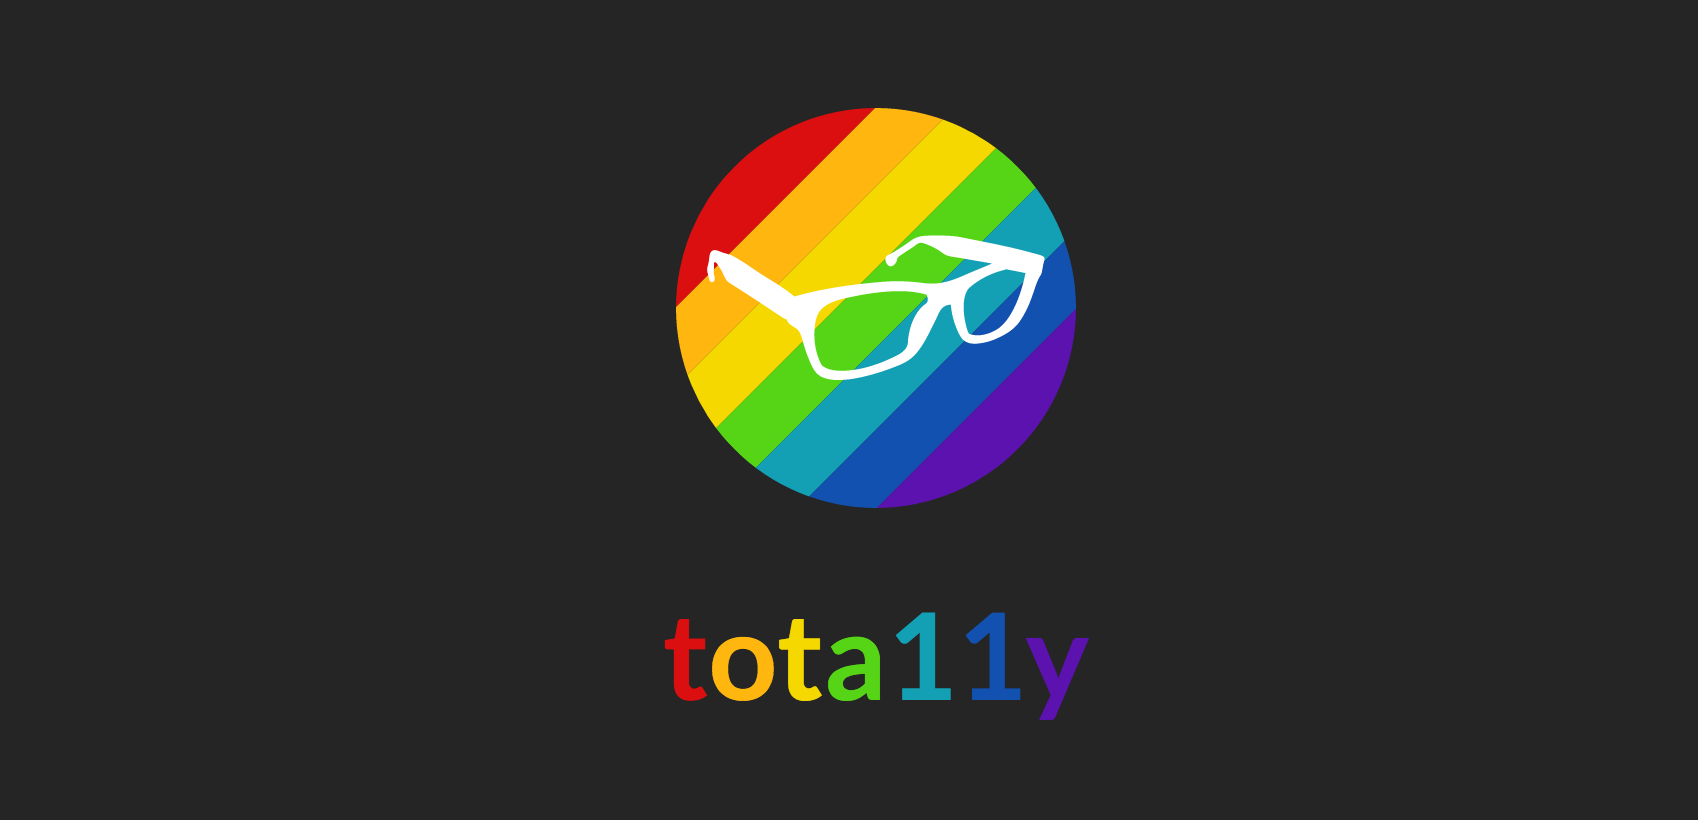 A sunglasses logo with the text "tota11y" beneath it